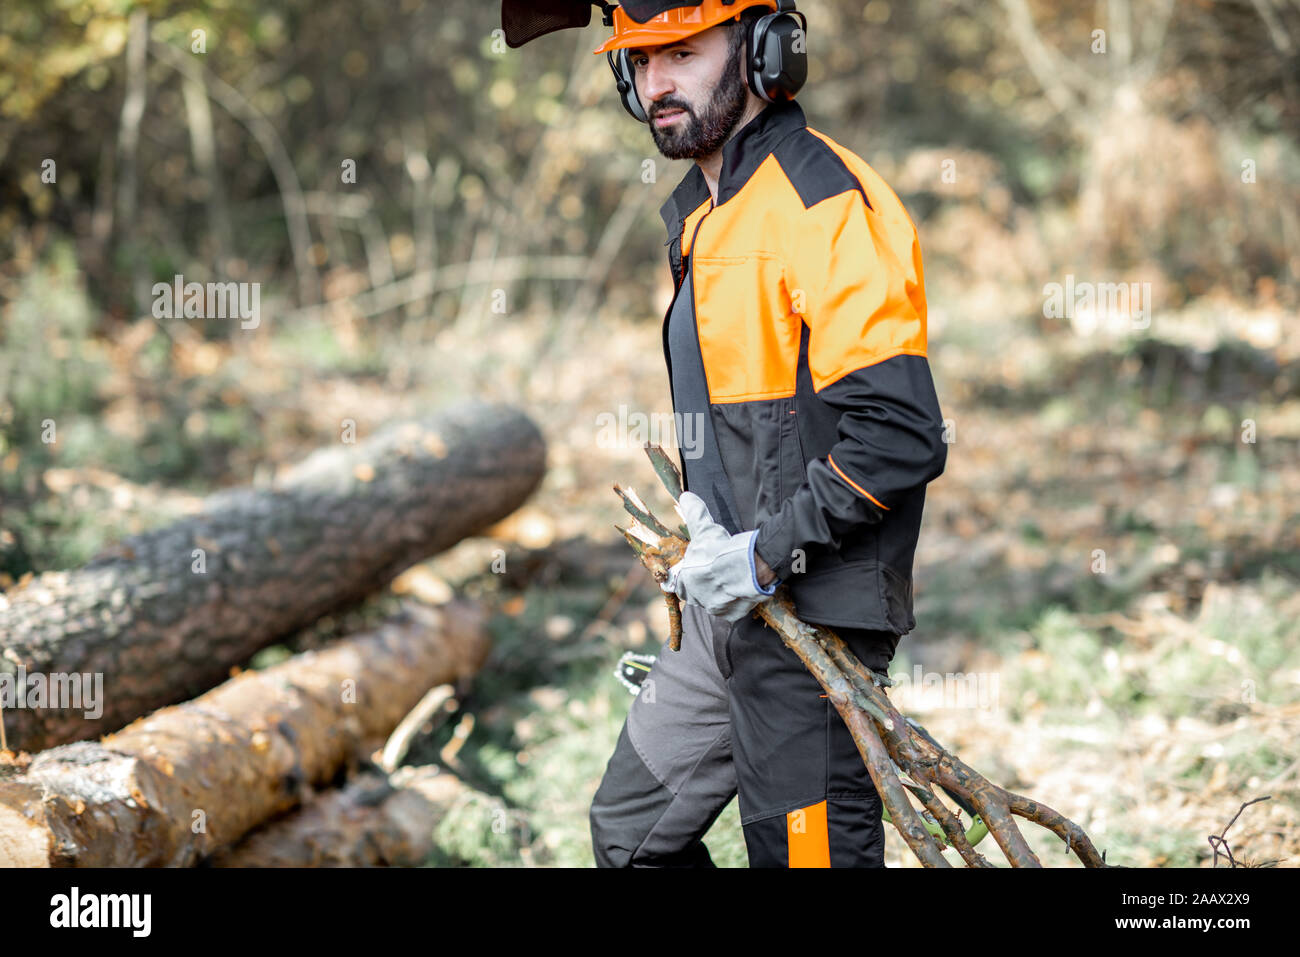 Professional lumberjack in protective workwear carrying tree branches while logging in the pine forest Stock Photo